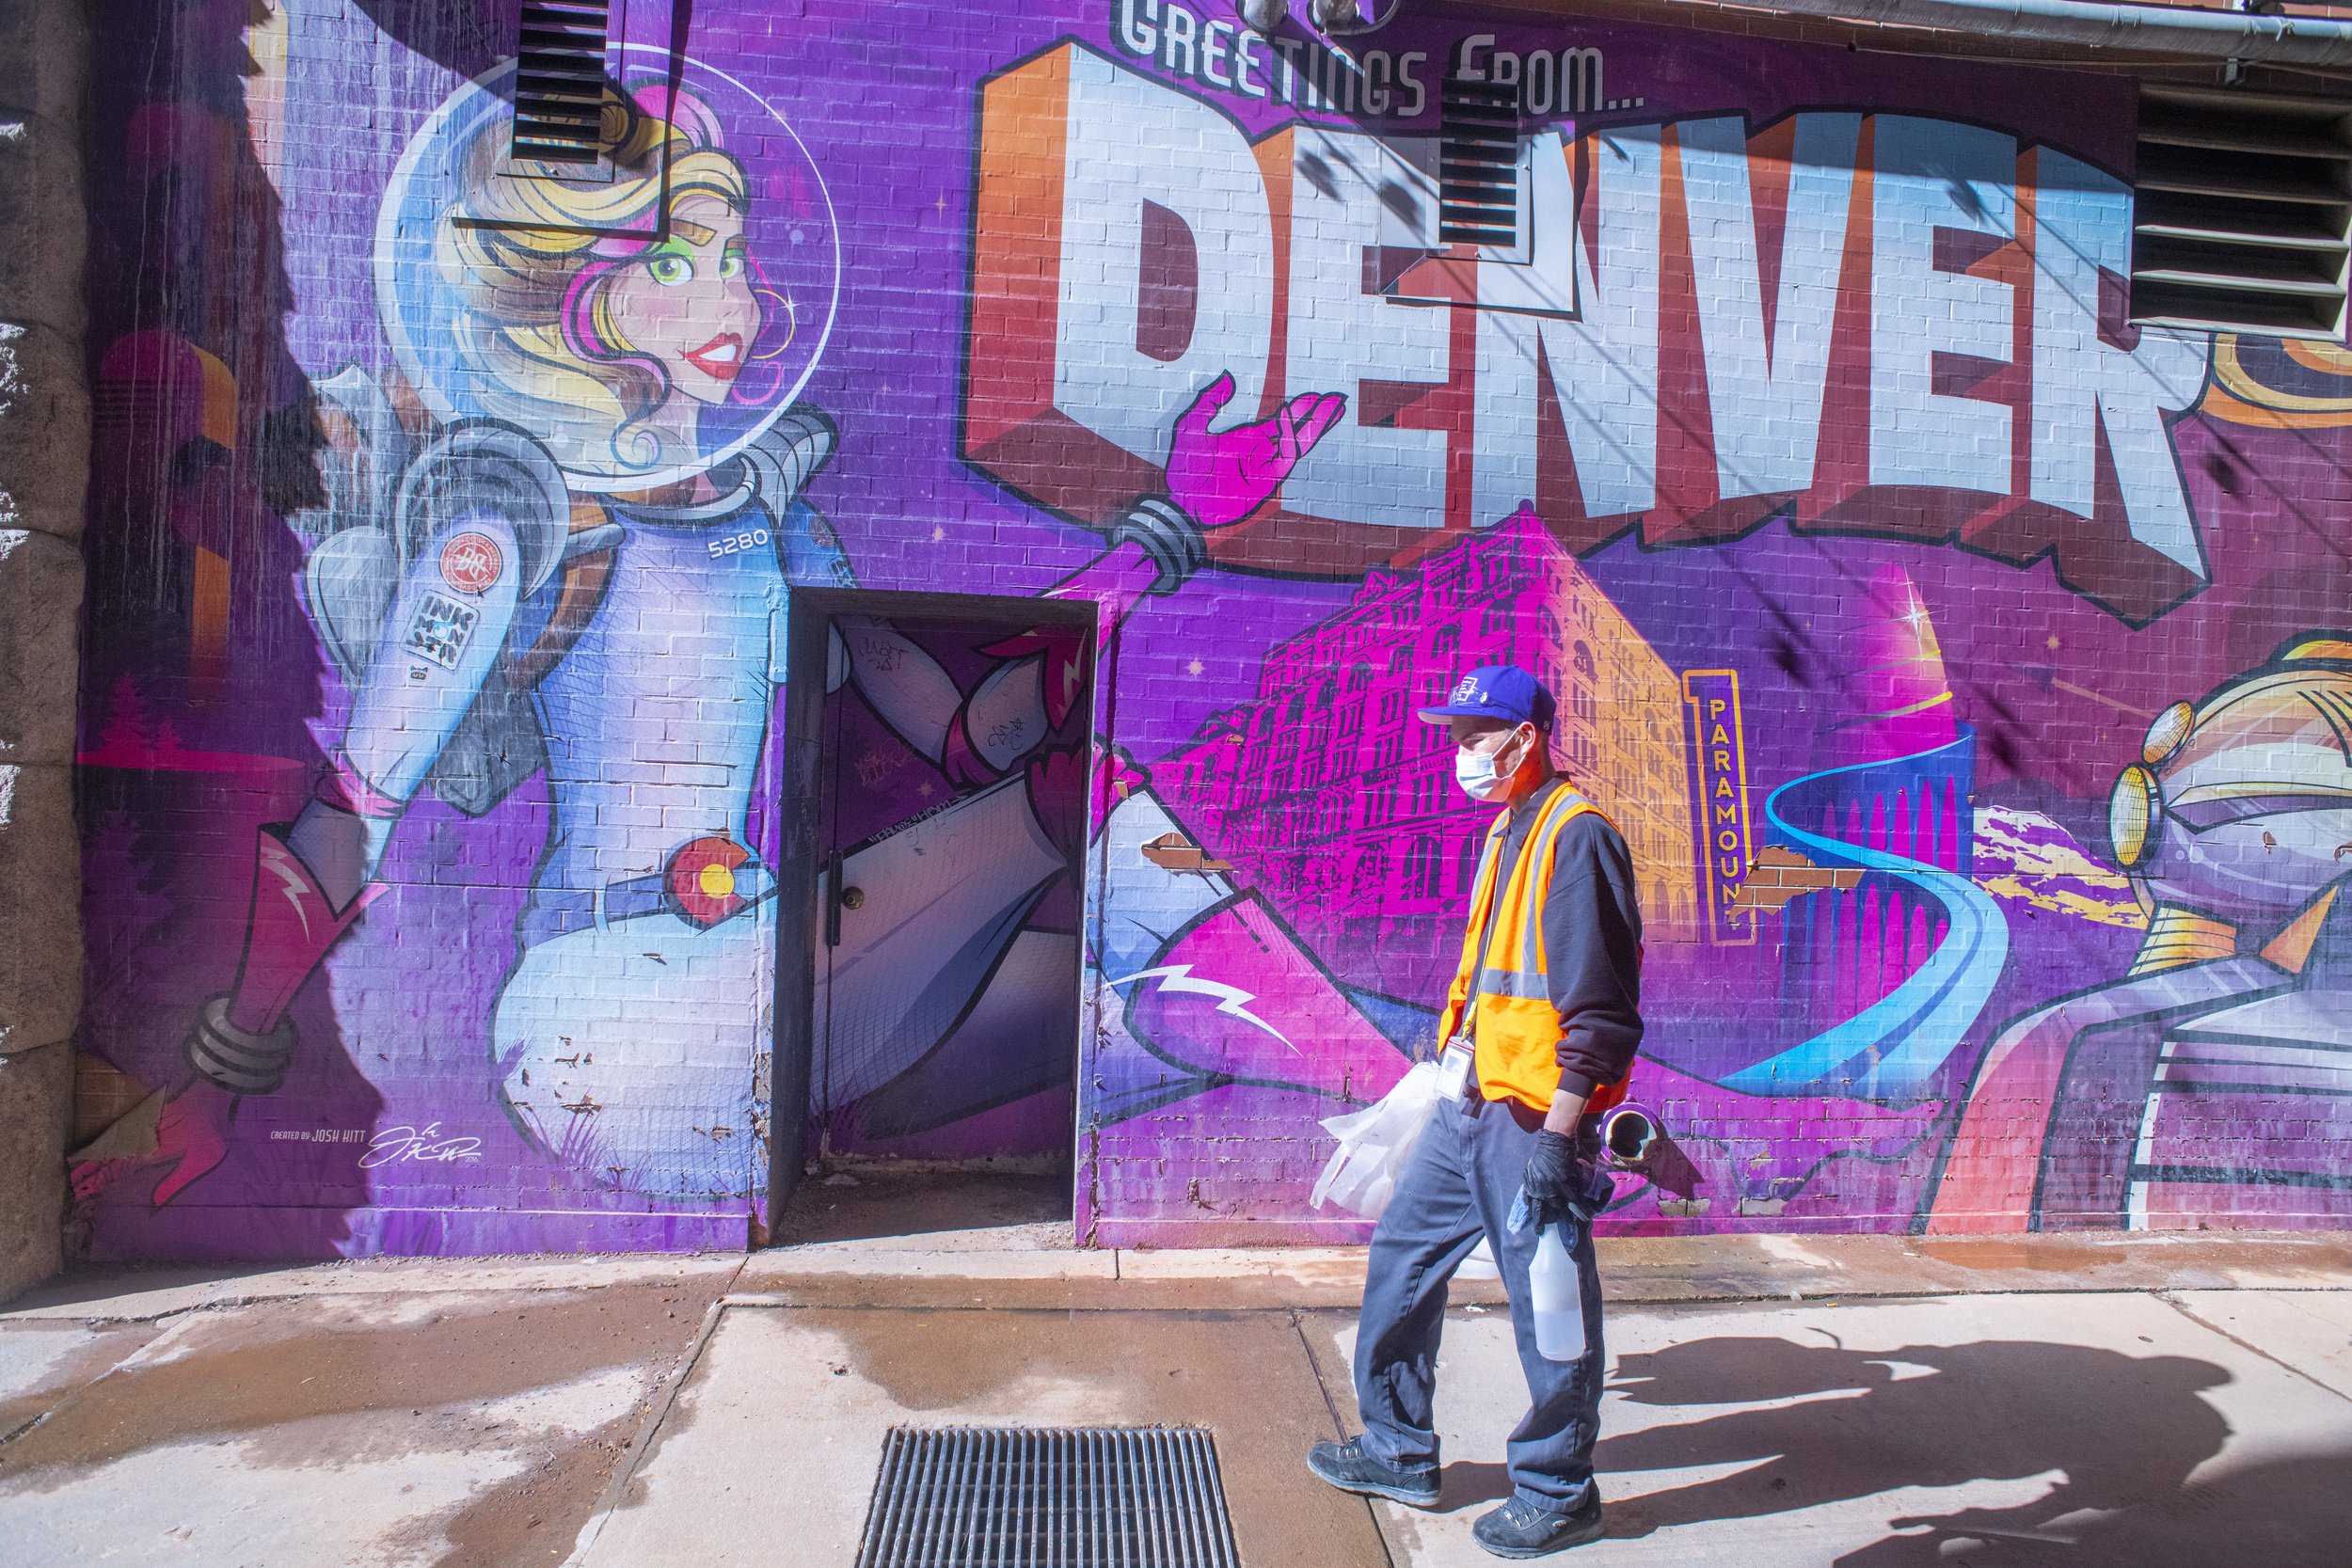 Not all the art is within the walls – The Denver Post